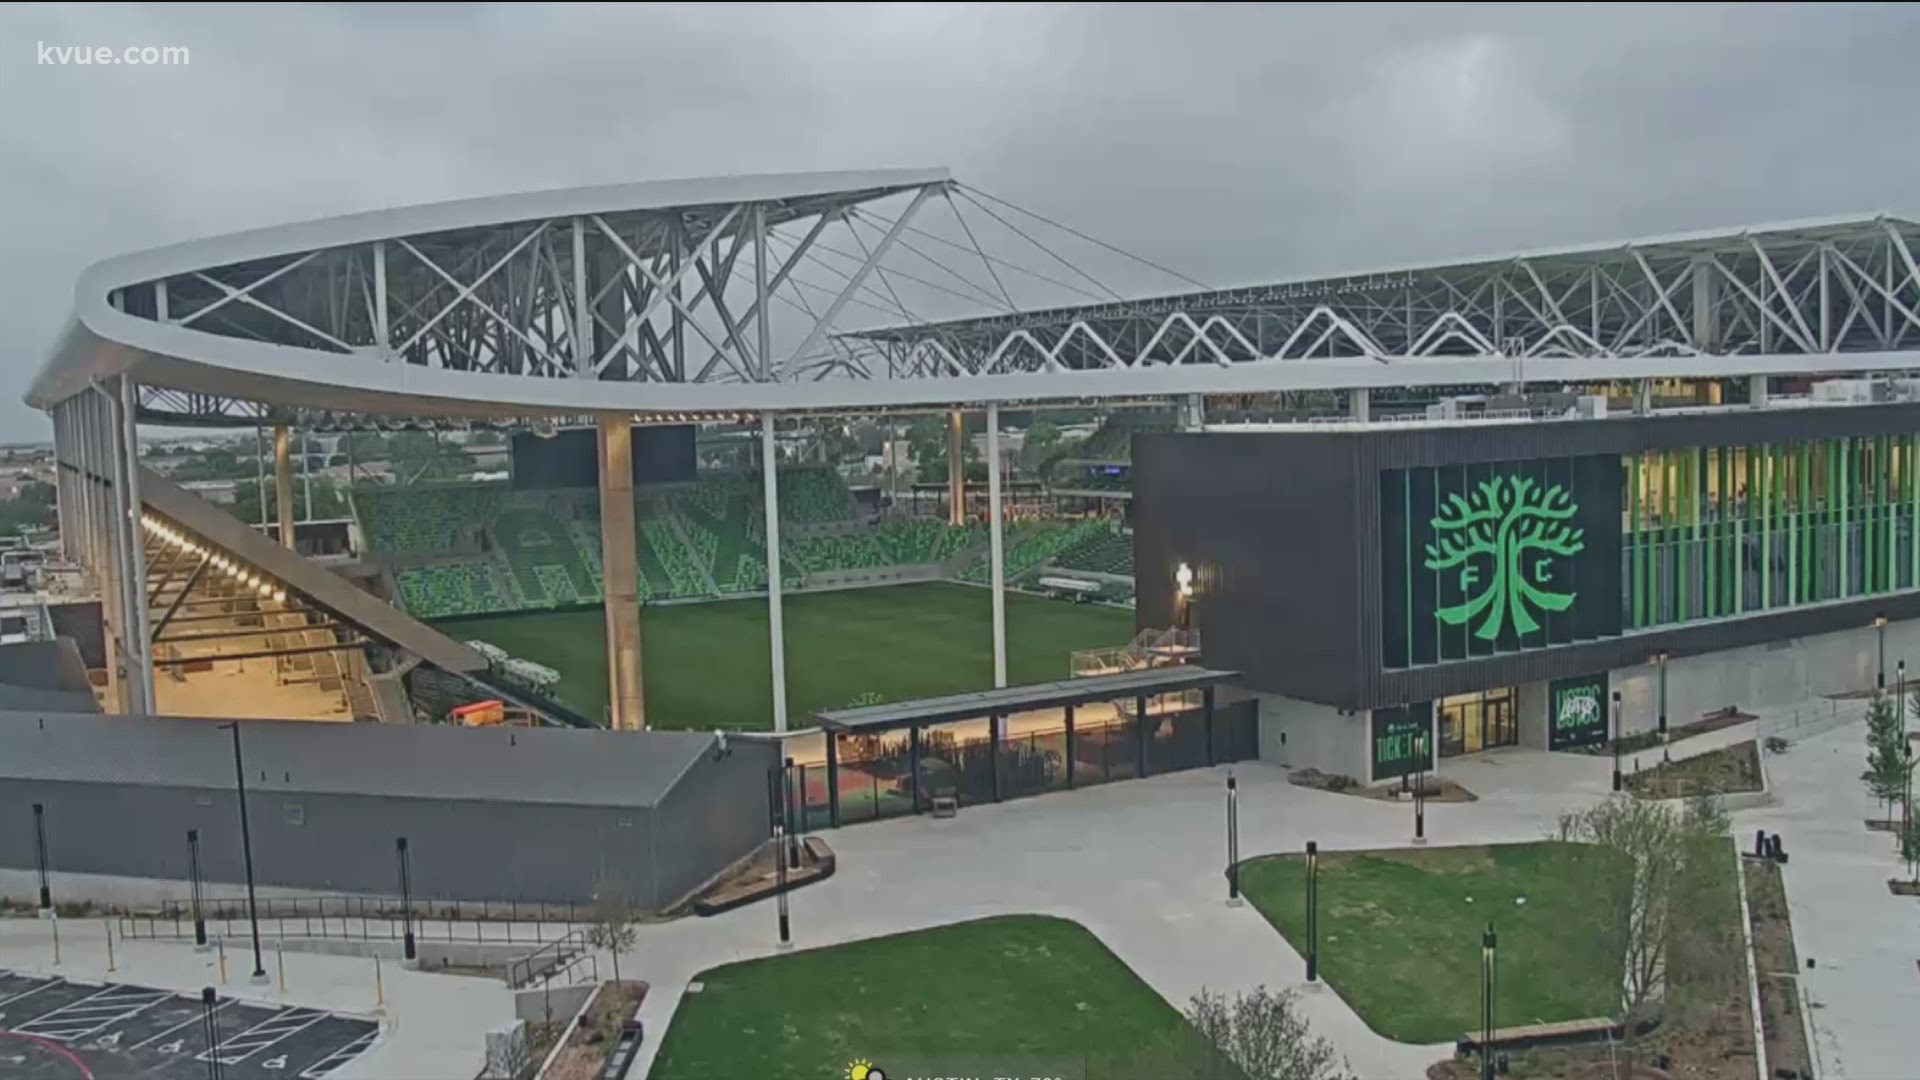 Austin FC will be conducting sound checks at Q2 Stadium from 8 p.m. to 8:45 p.m. on April 28.